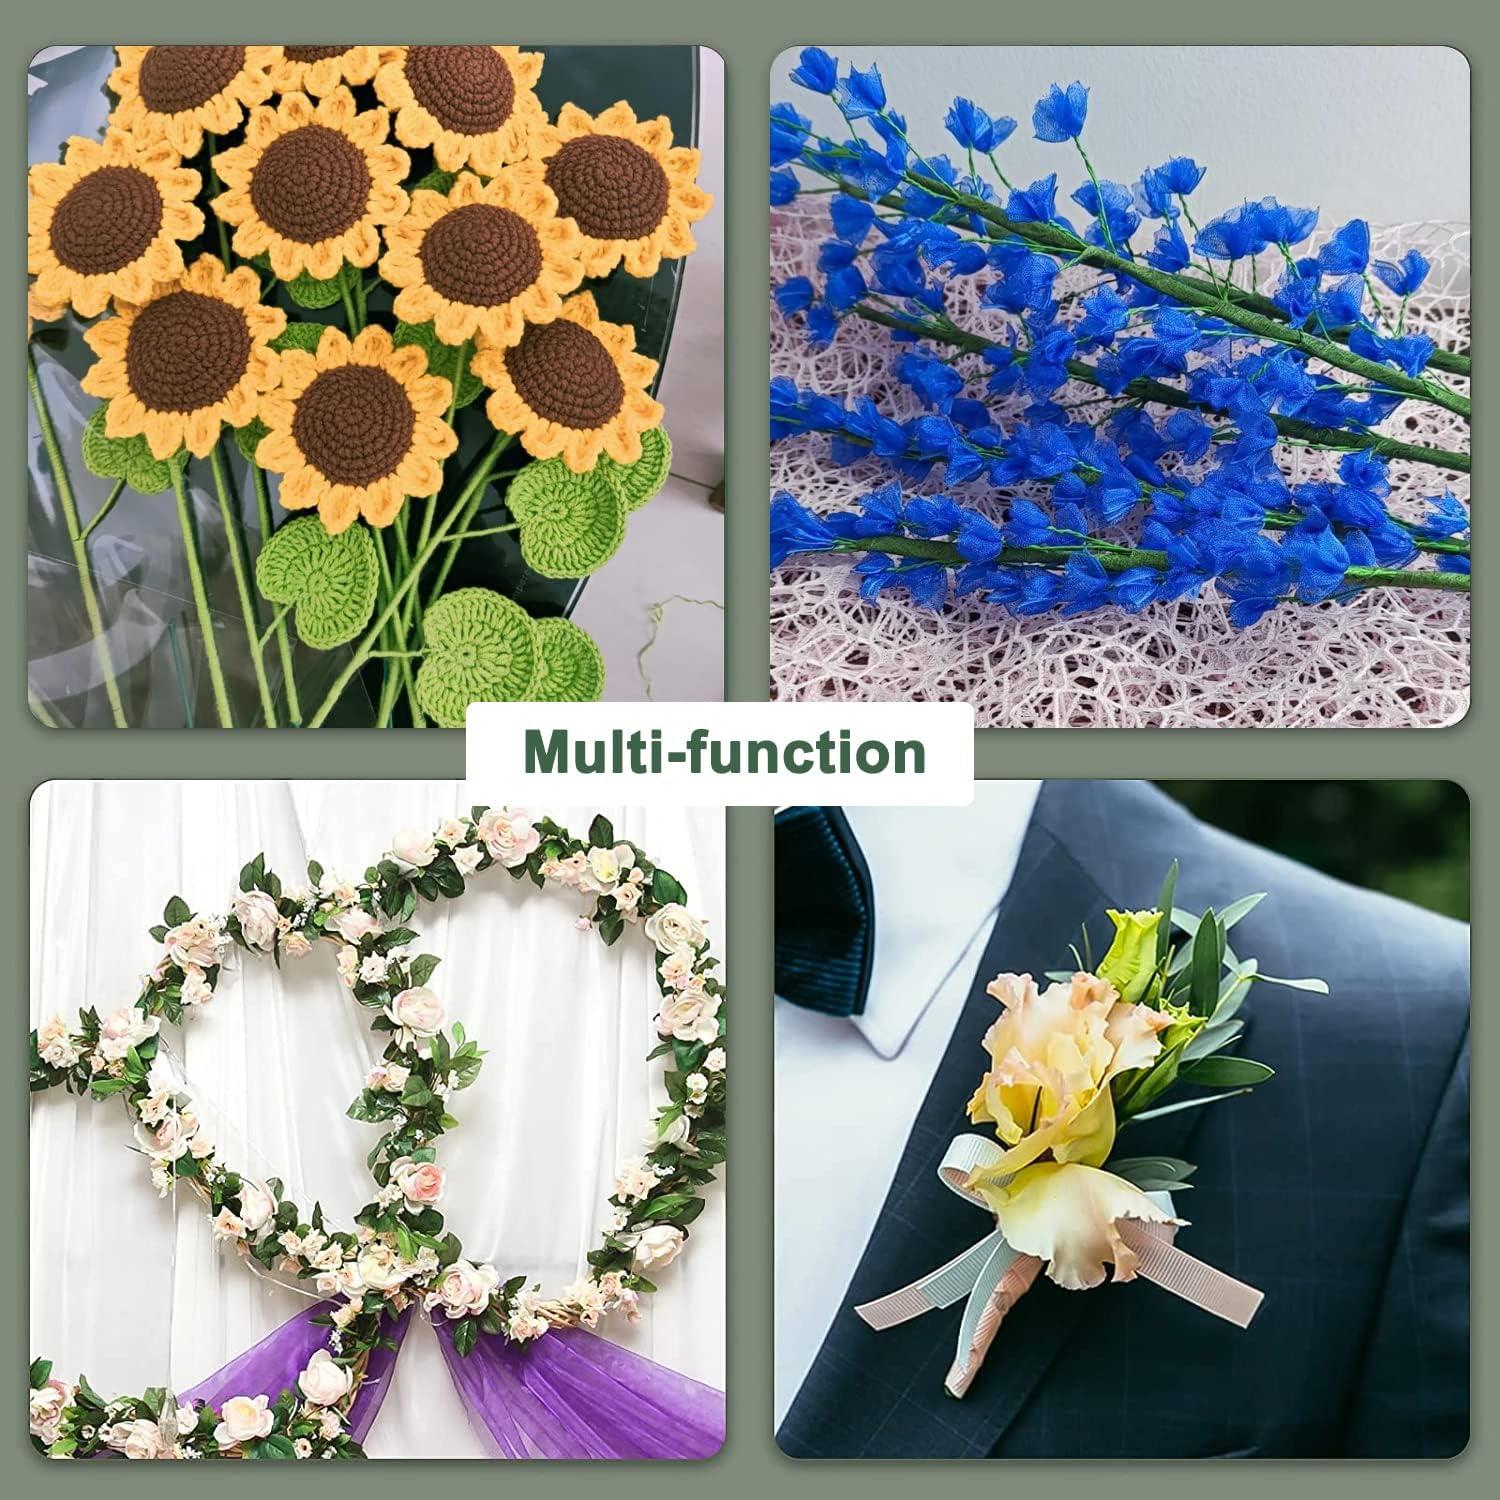 SONGZIMING Floral Arrangement Kit with Green Floral Tape 22 Gauge